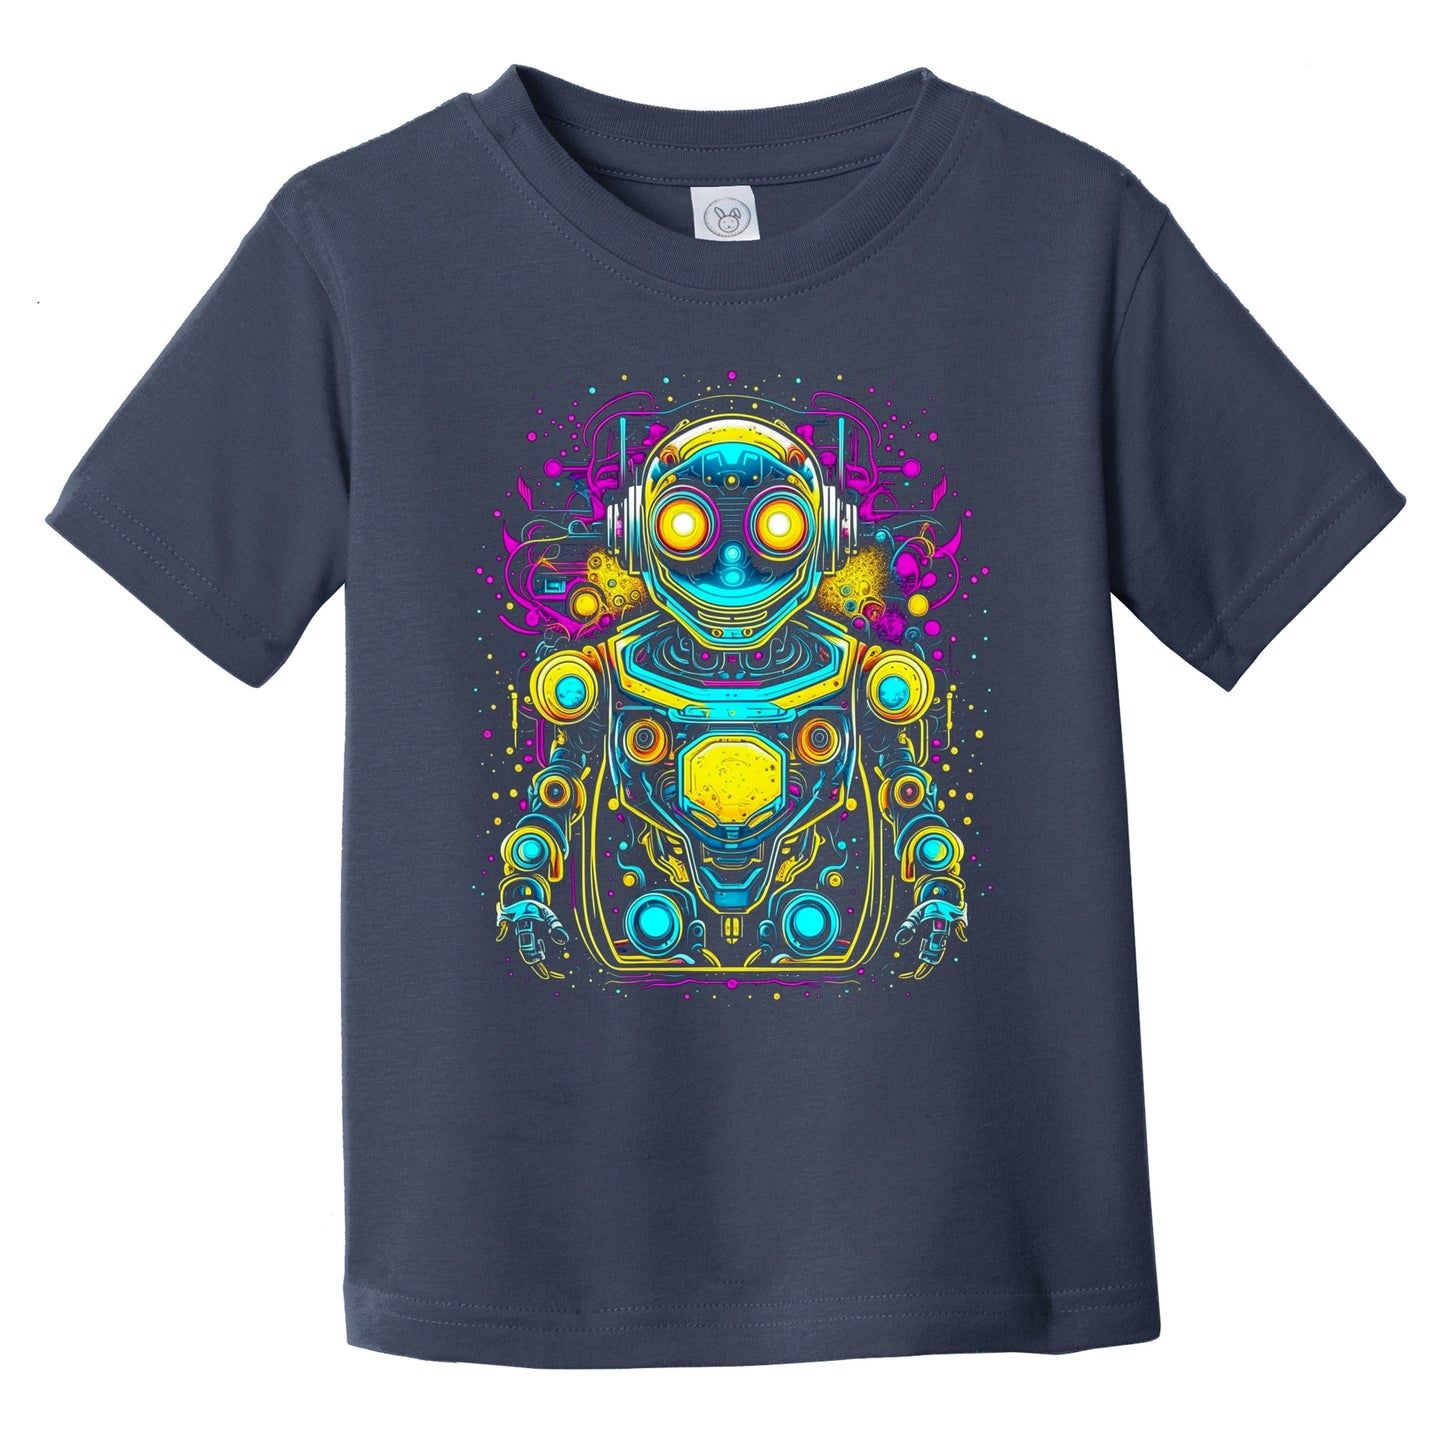 Colorful Bright Robot Vibrant Psychedelic Art Infant Toddler T-Shirt